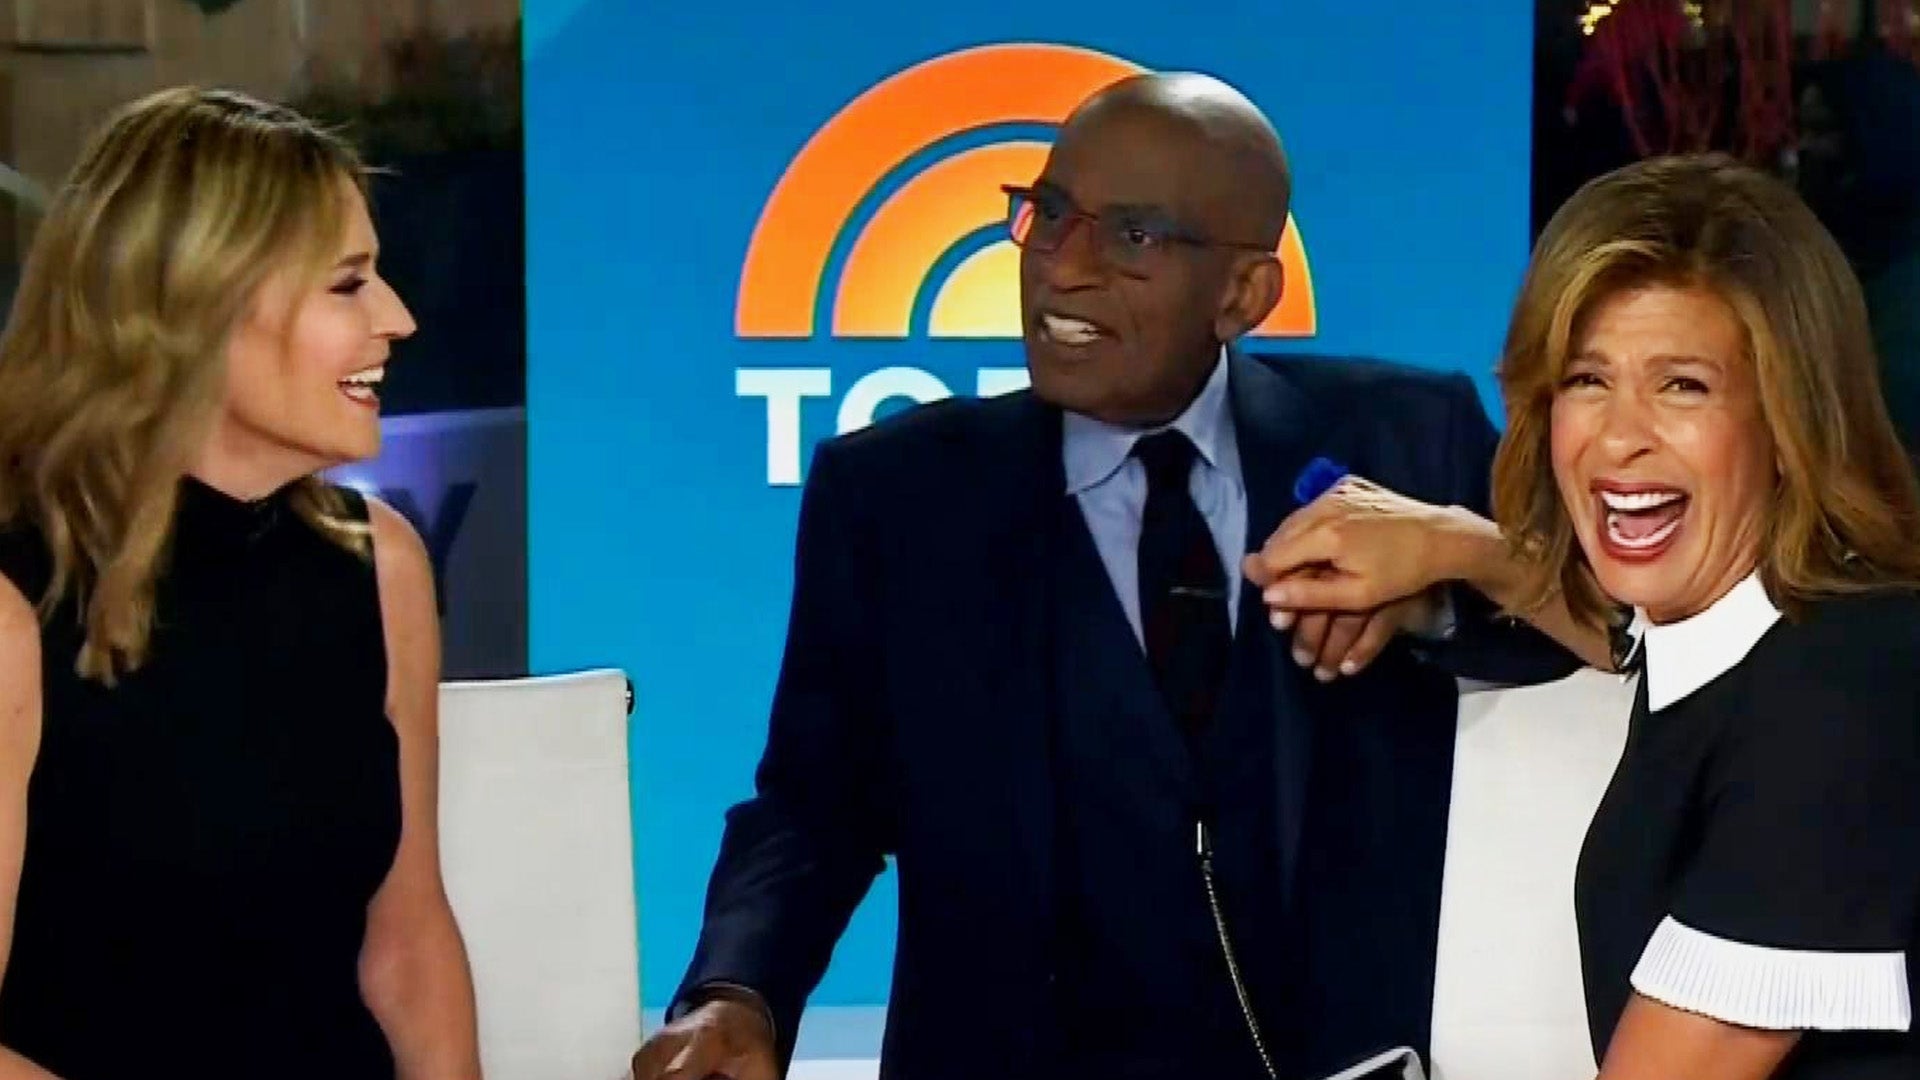 Al Roker Makes Emotional Return to 'Today' Show Following Hospitalization